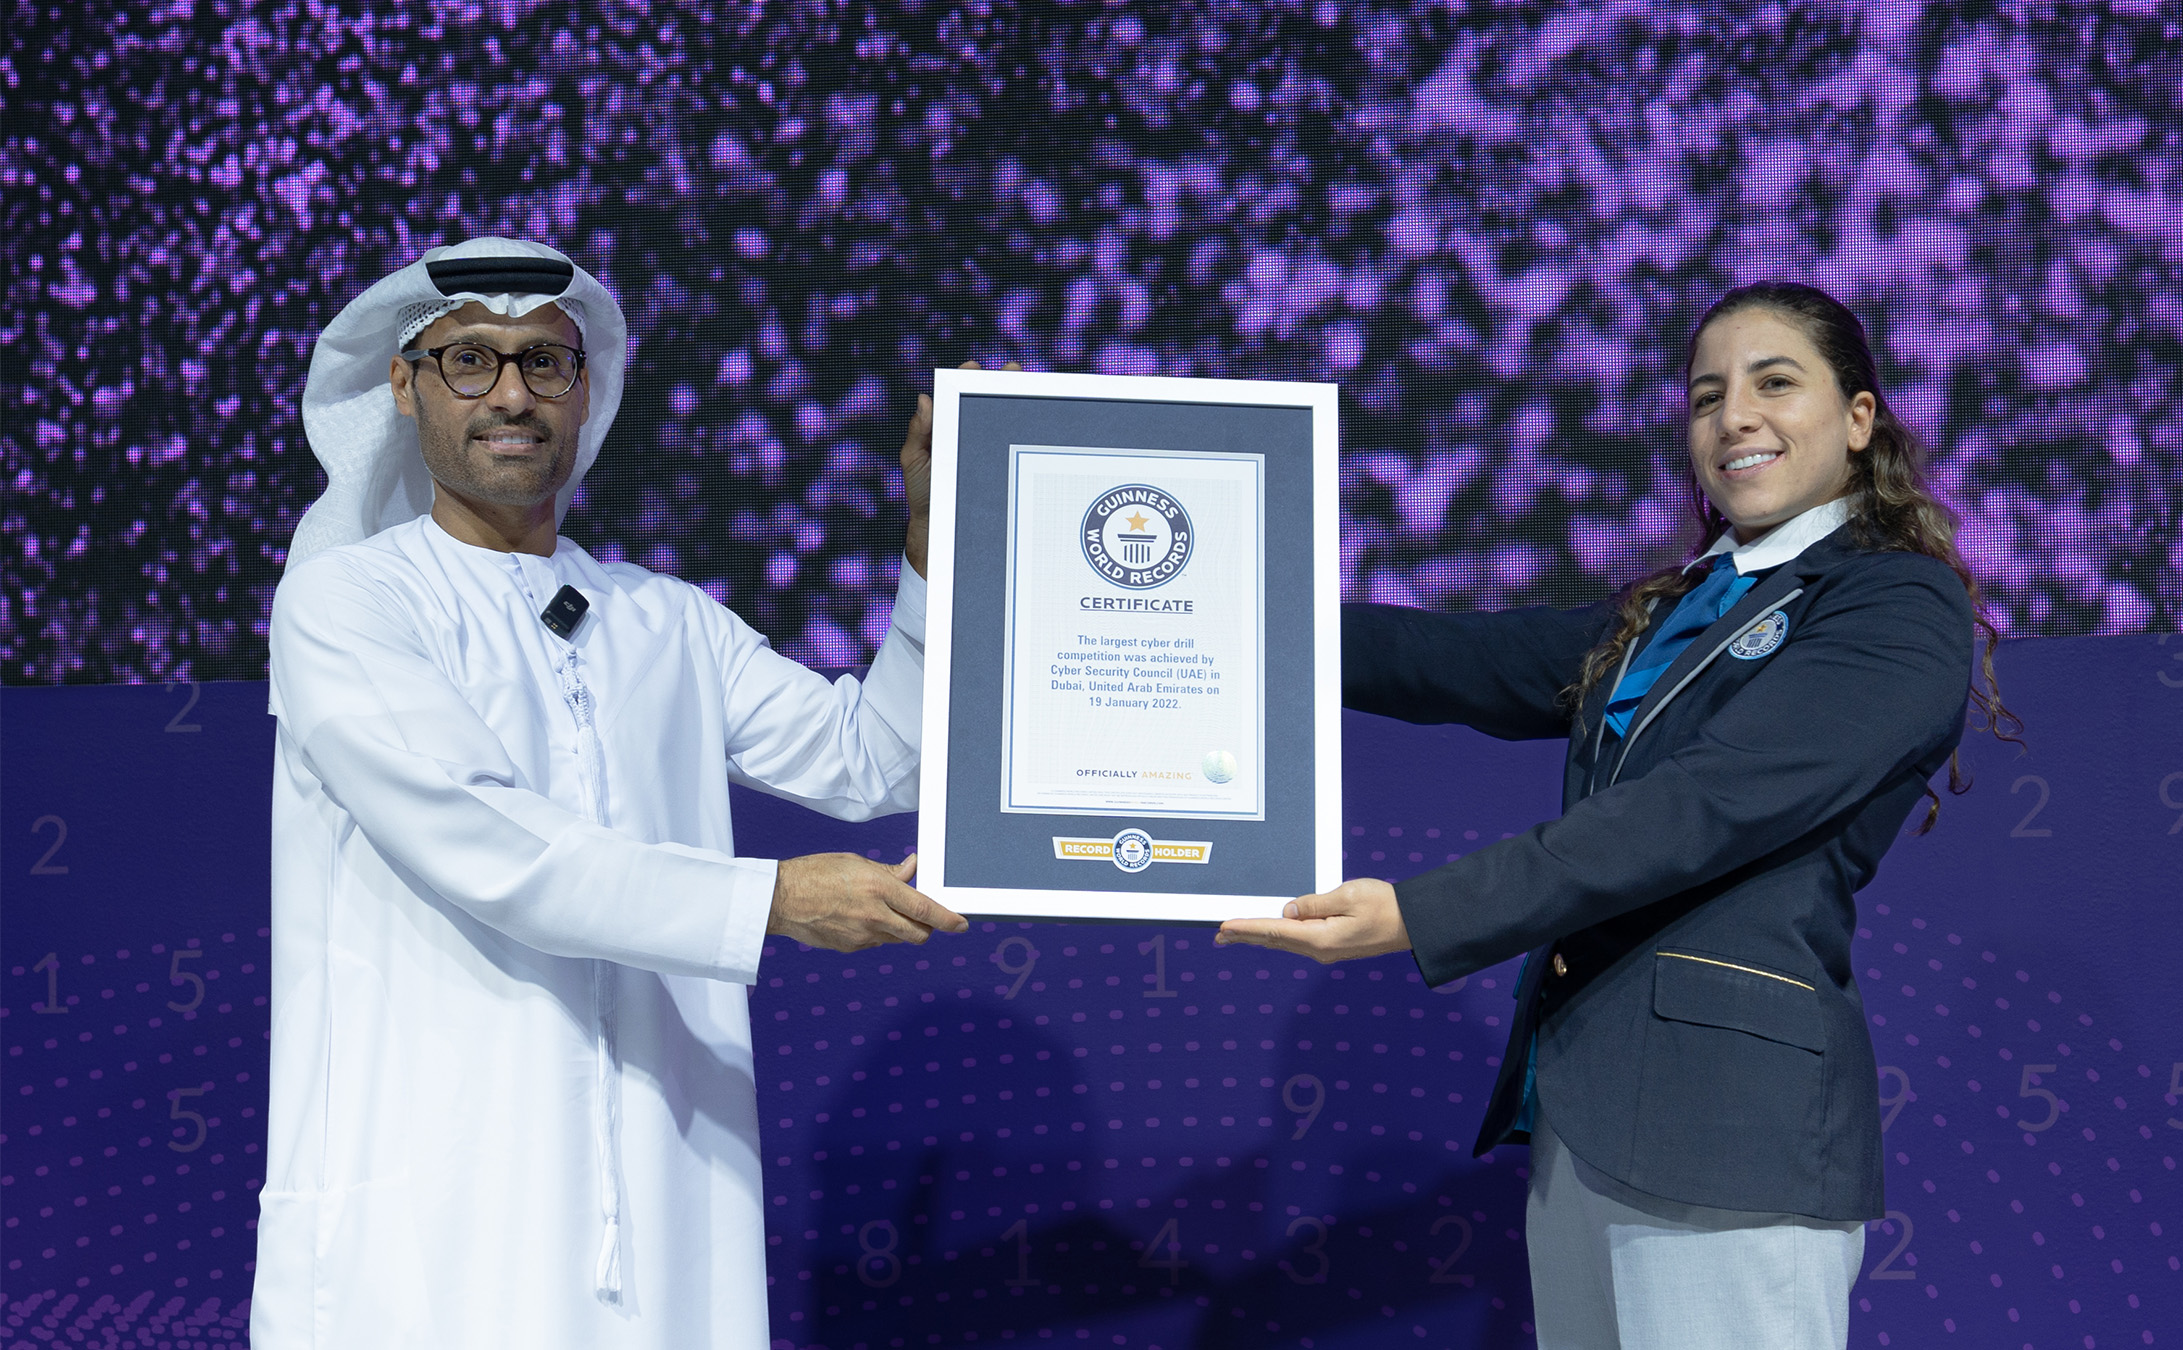 Cyber Security Council achieved a new record in the Guinness Book